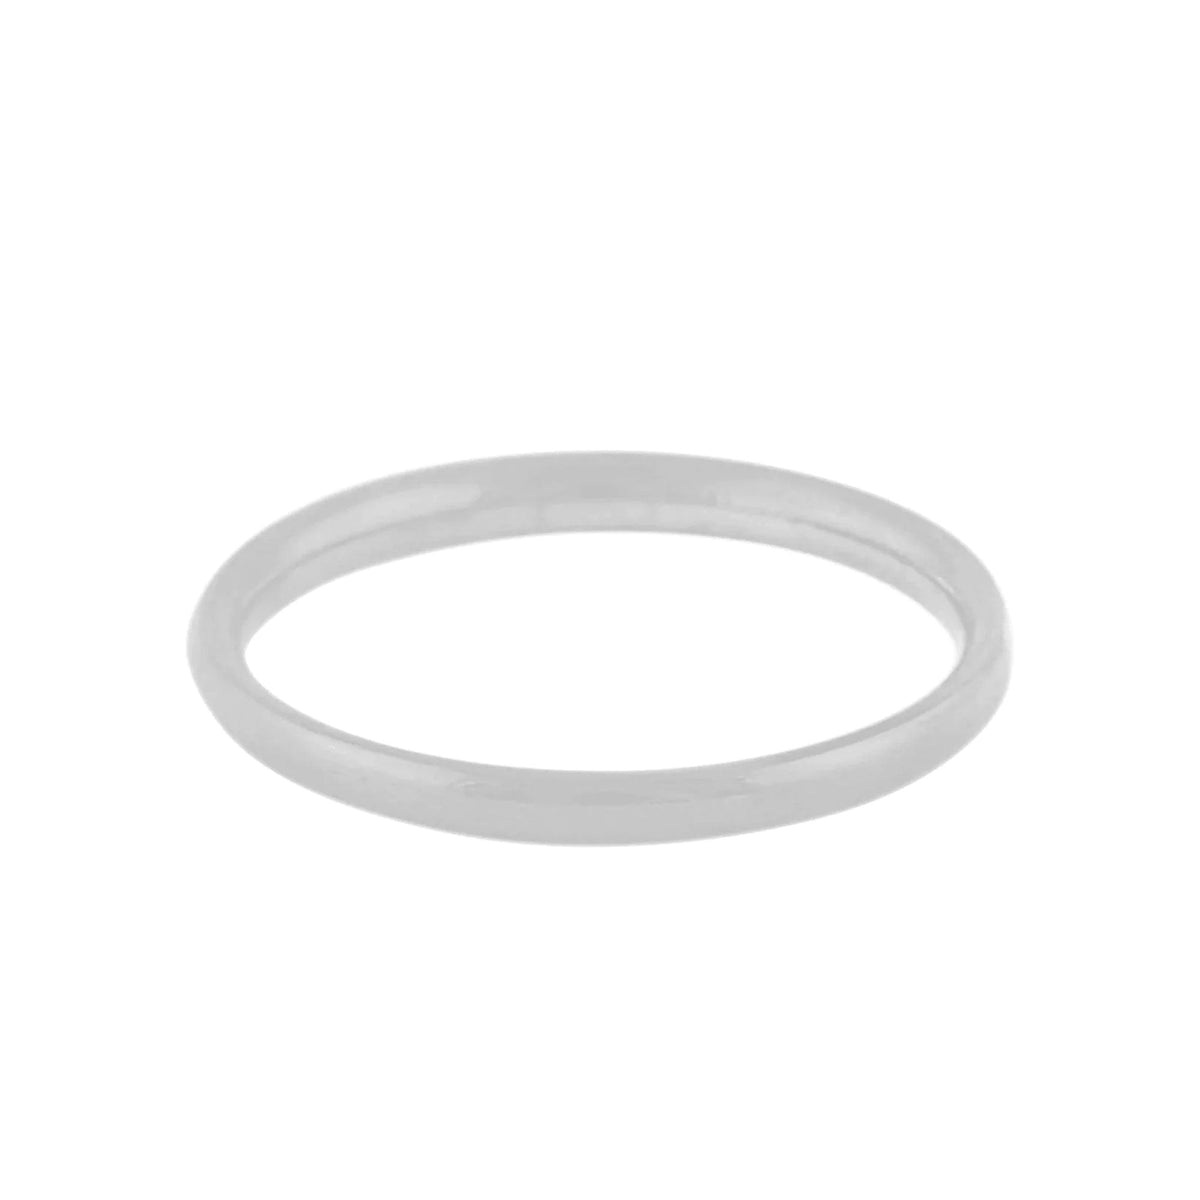 BohoMoon Stainless Steel Plain Band Ring Silver / US 5 / UK J / EUR 49 (x small)